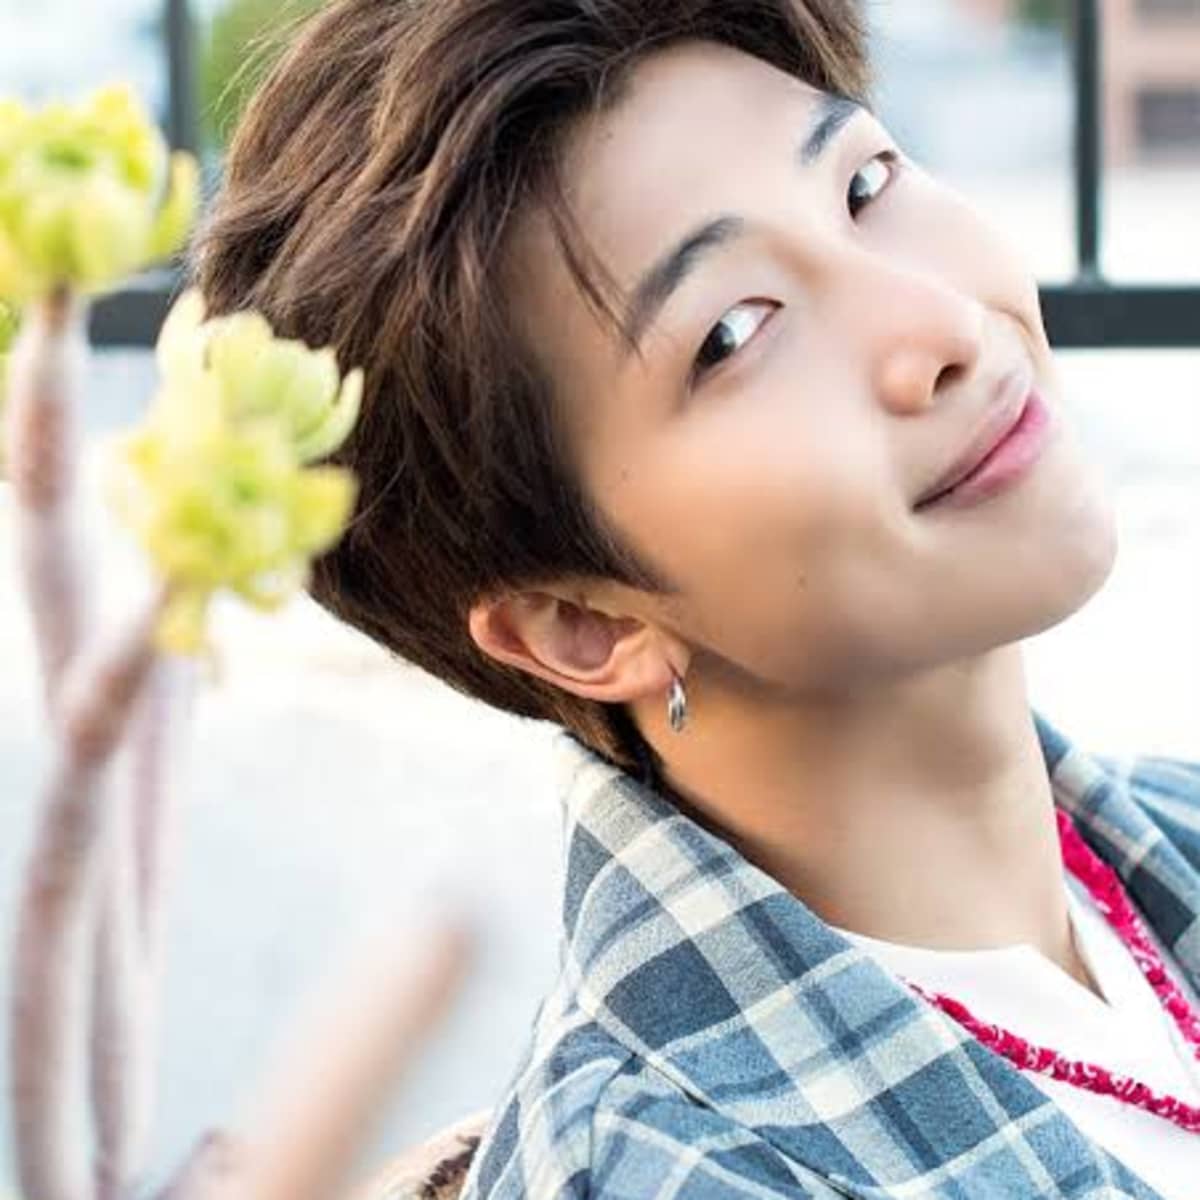 BTS's leader RM on identity, self-discovery and the concept of